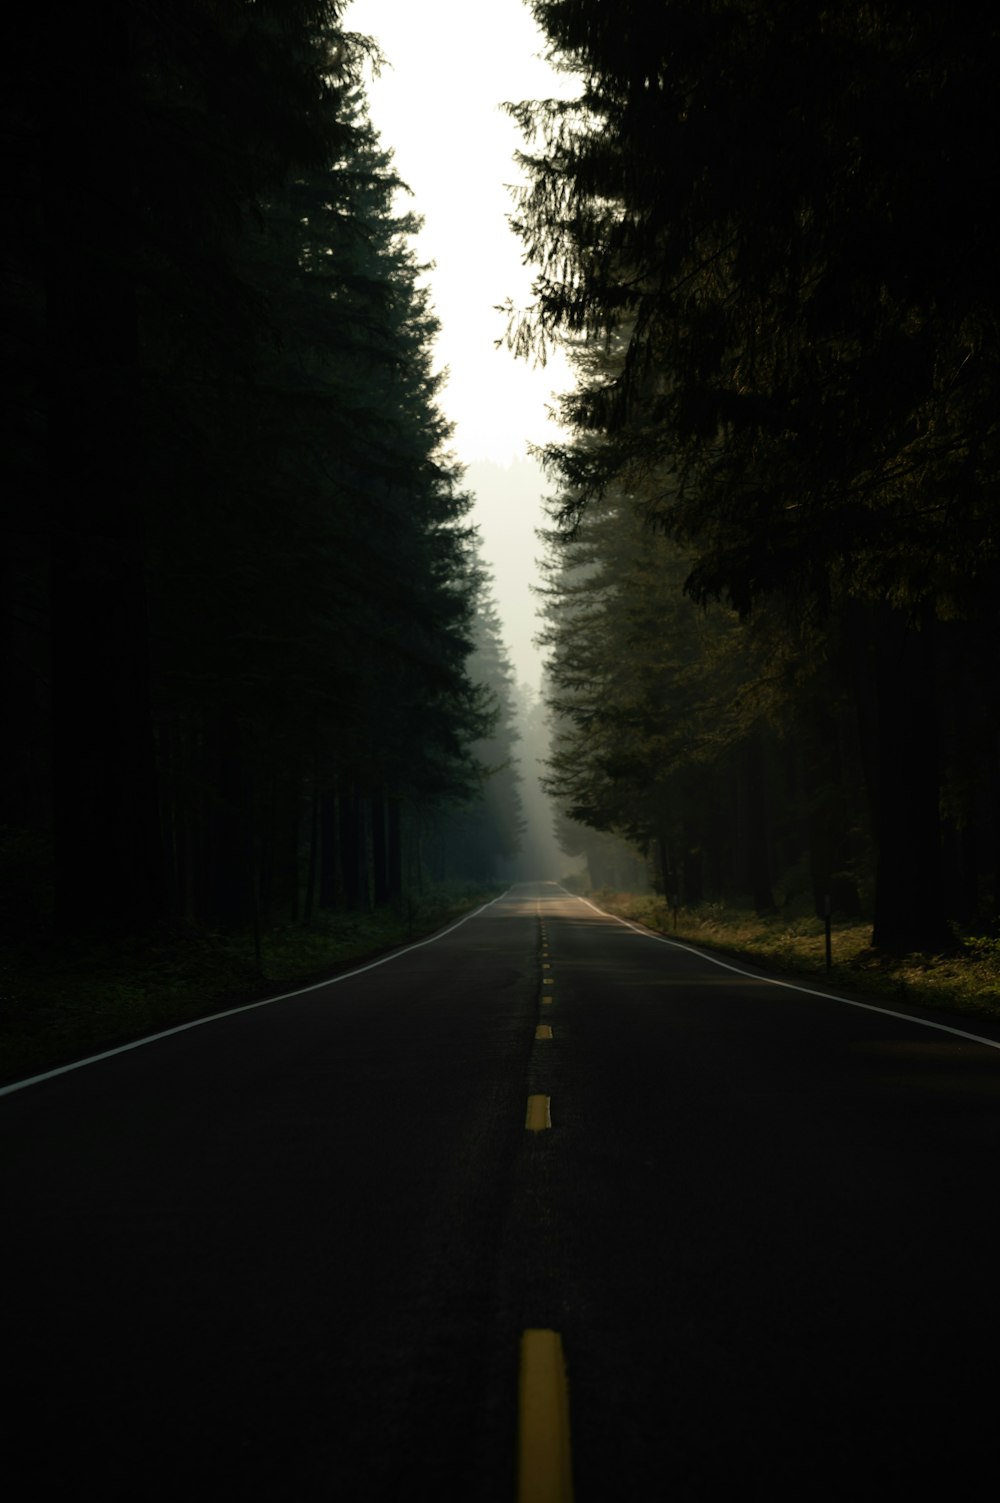 a dark road with trees on both sides